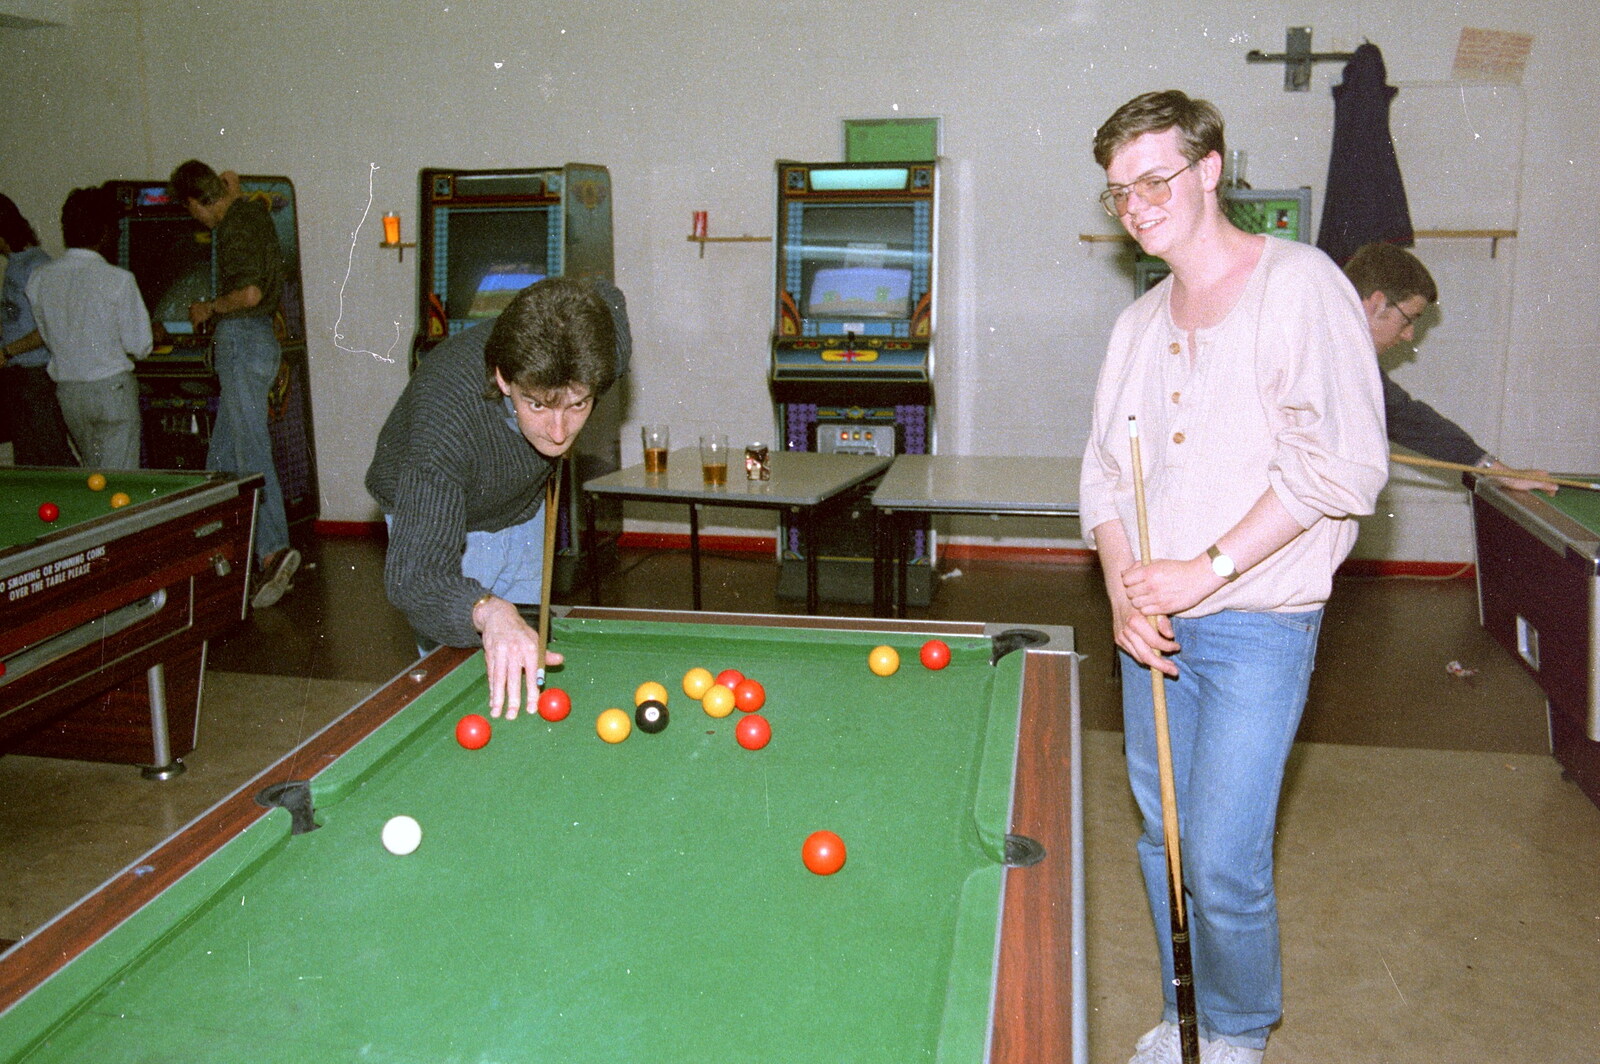 Stick-game action down in the Students' Union from Uni: Riki And Dave's Place, Sutherland Road, Plymouth - 12th May 1986